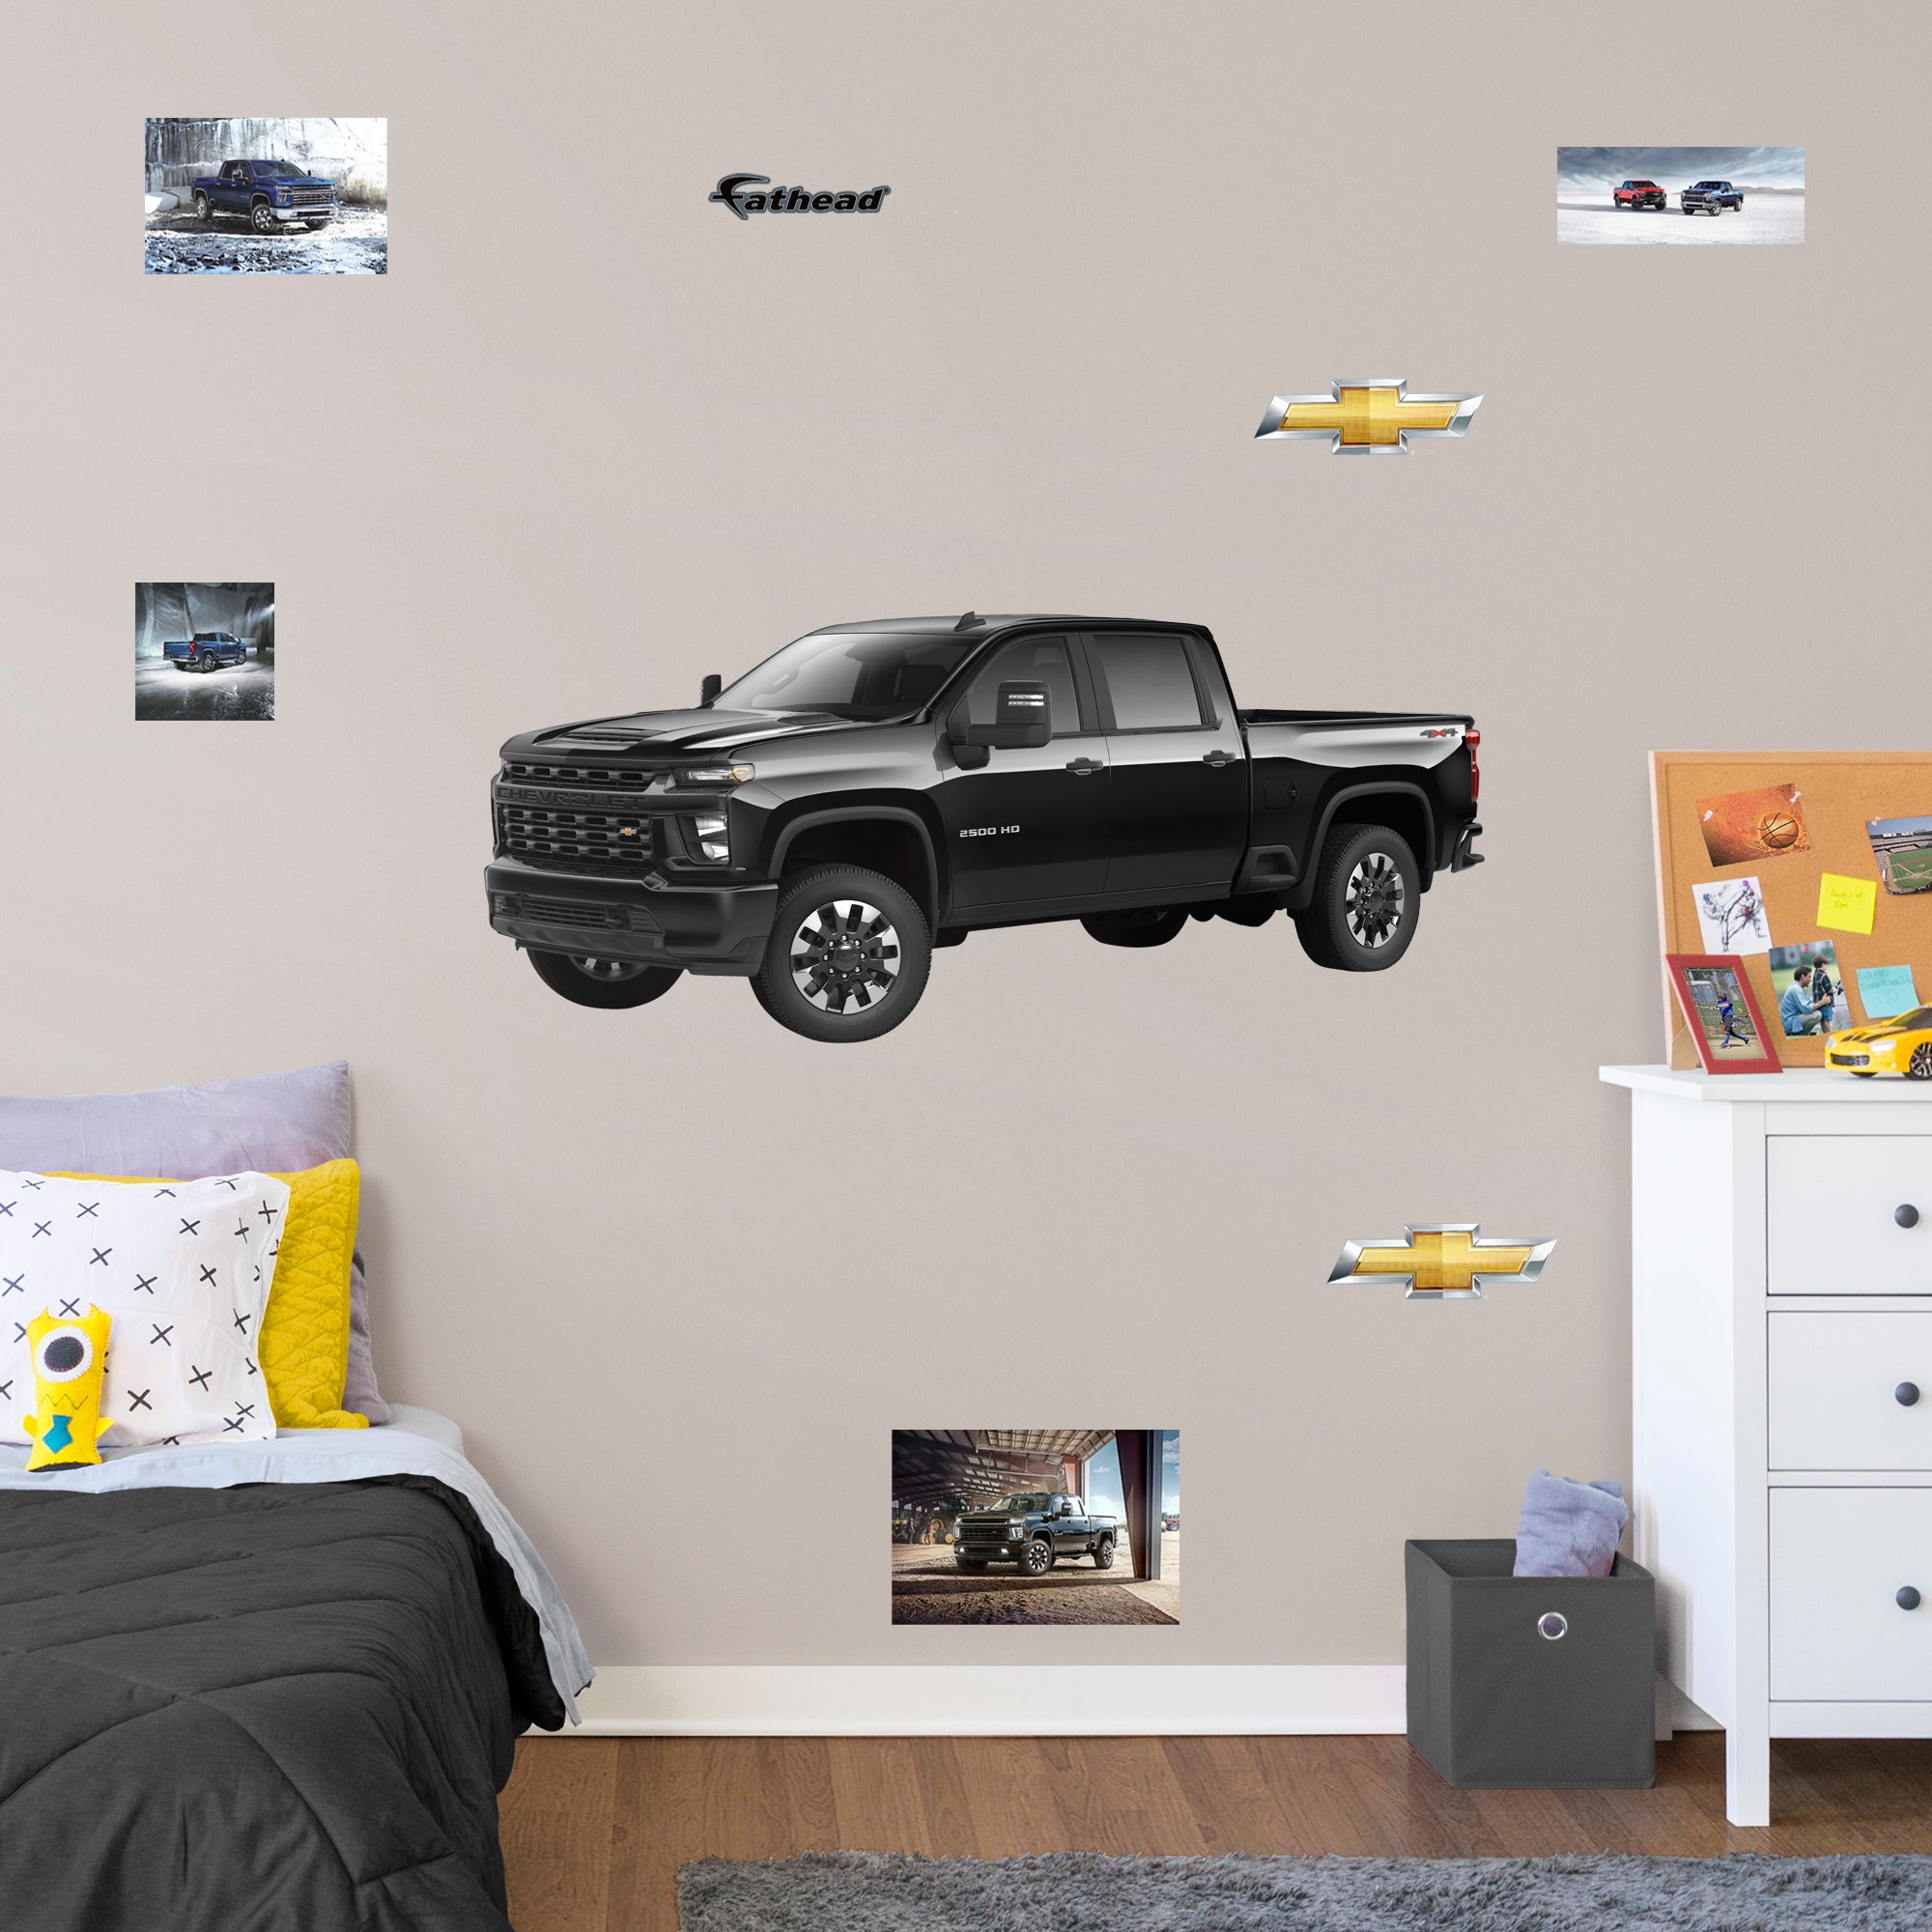 Chevrolet Black Silverado: Officially Licensed GM Removable Wall Decal Life-Size + 7 Decals by Fathead | Vinyl